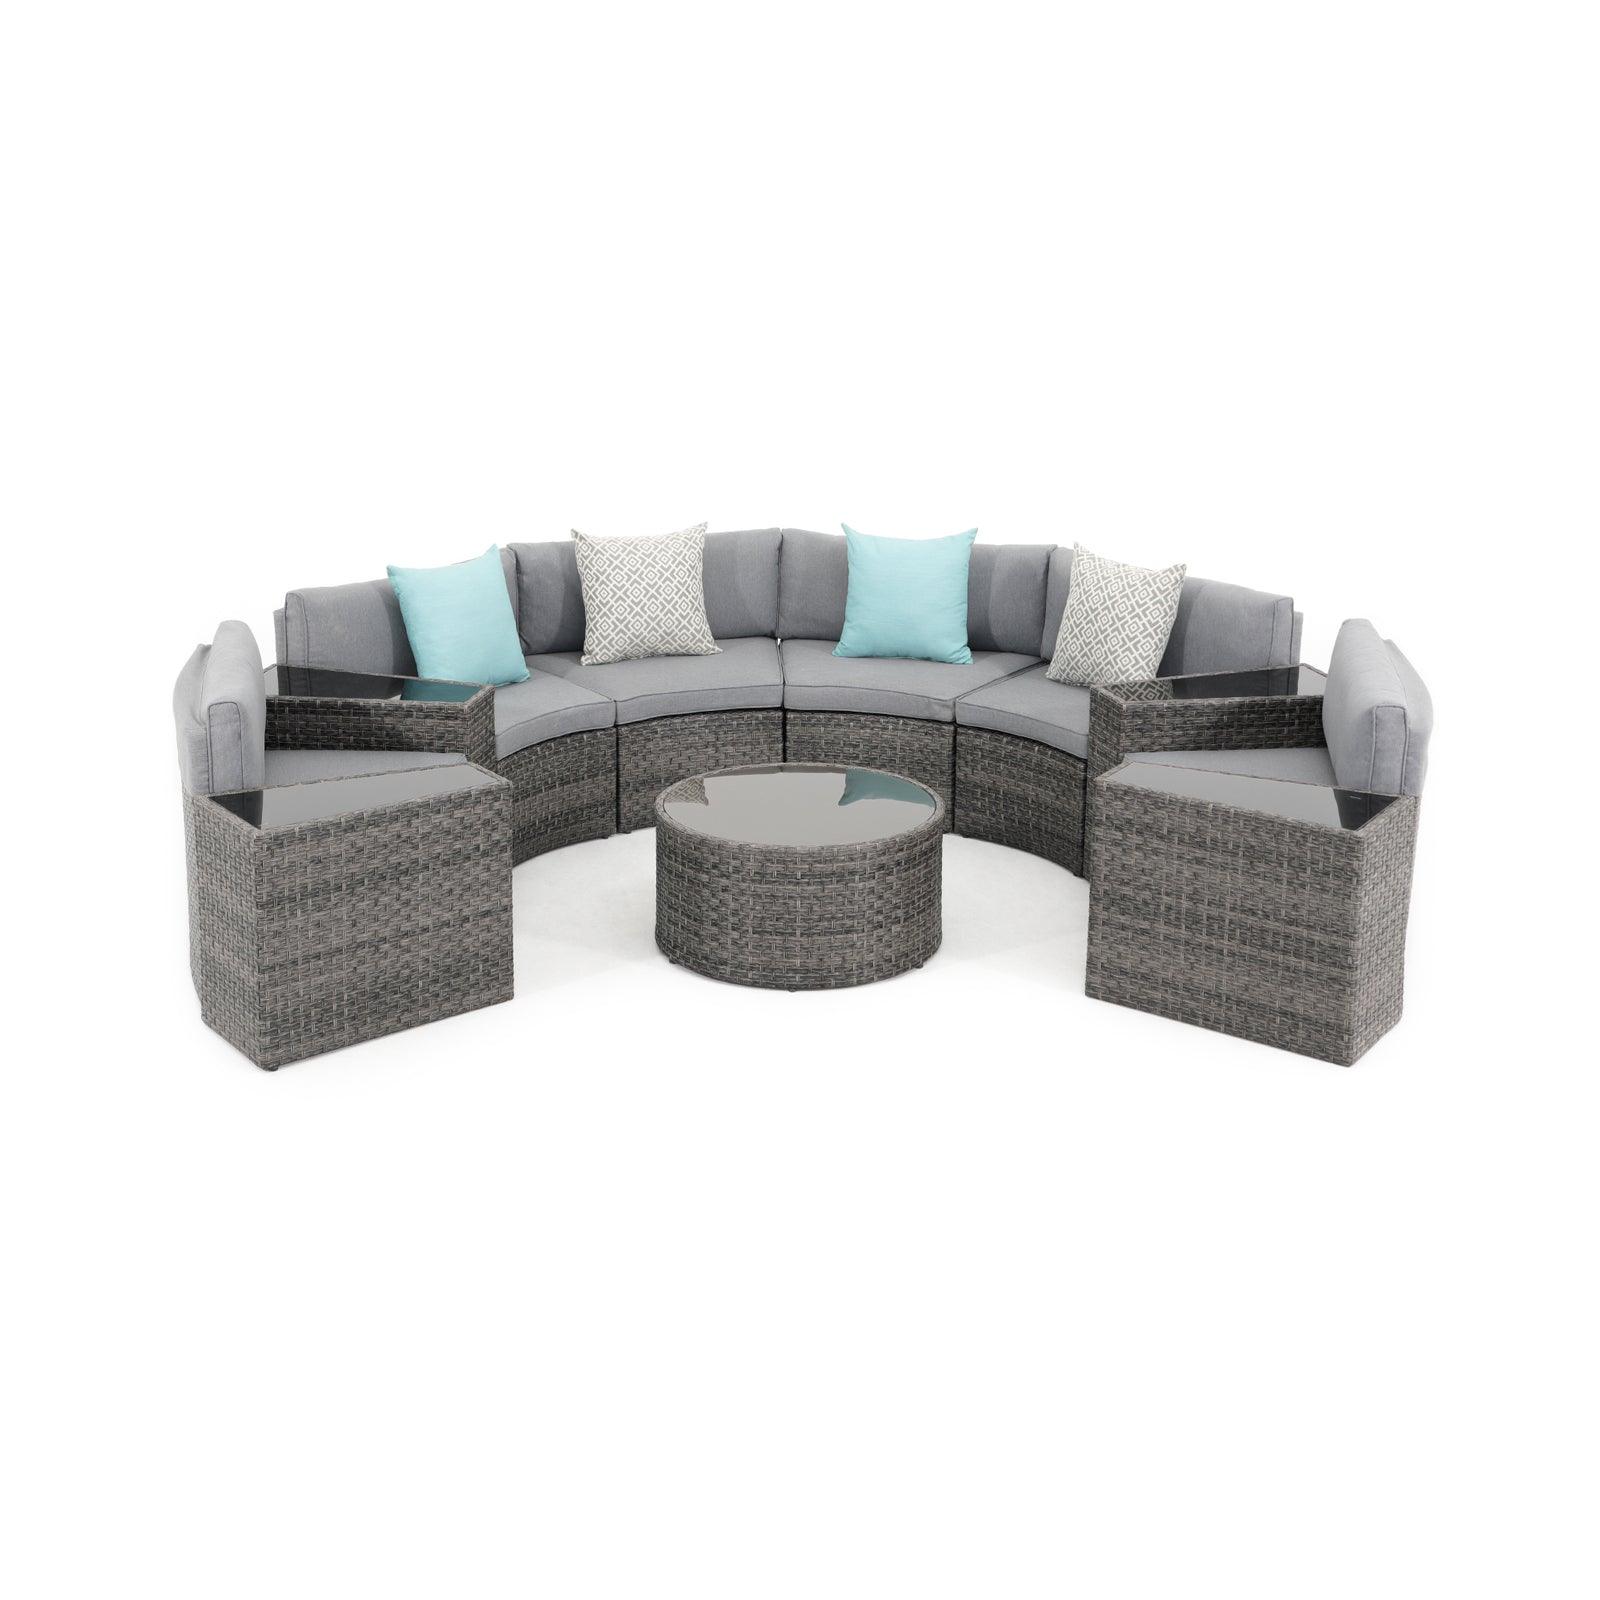 Boboli Modern Wicker Outdoor Furniture, 11-piece Grey Wicker Curved Sectional Set with grey cushions, 1 Round Glass Table, 4 side tables, 6 sectional sofas, front- Jardina Furniture#color_grey